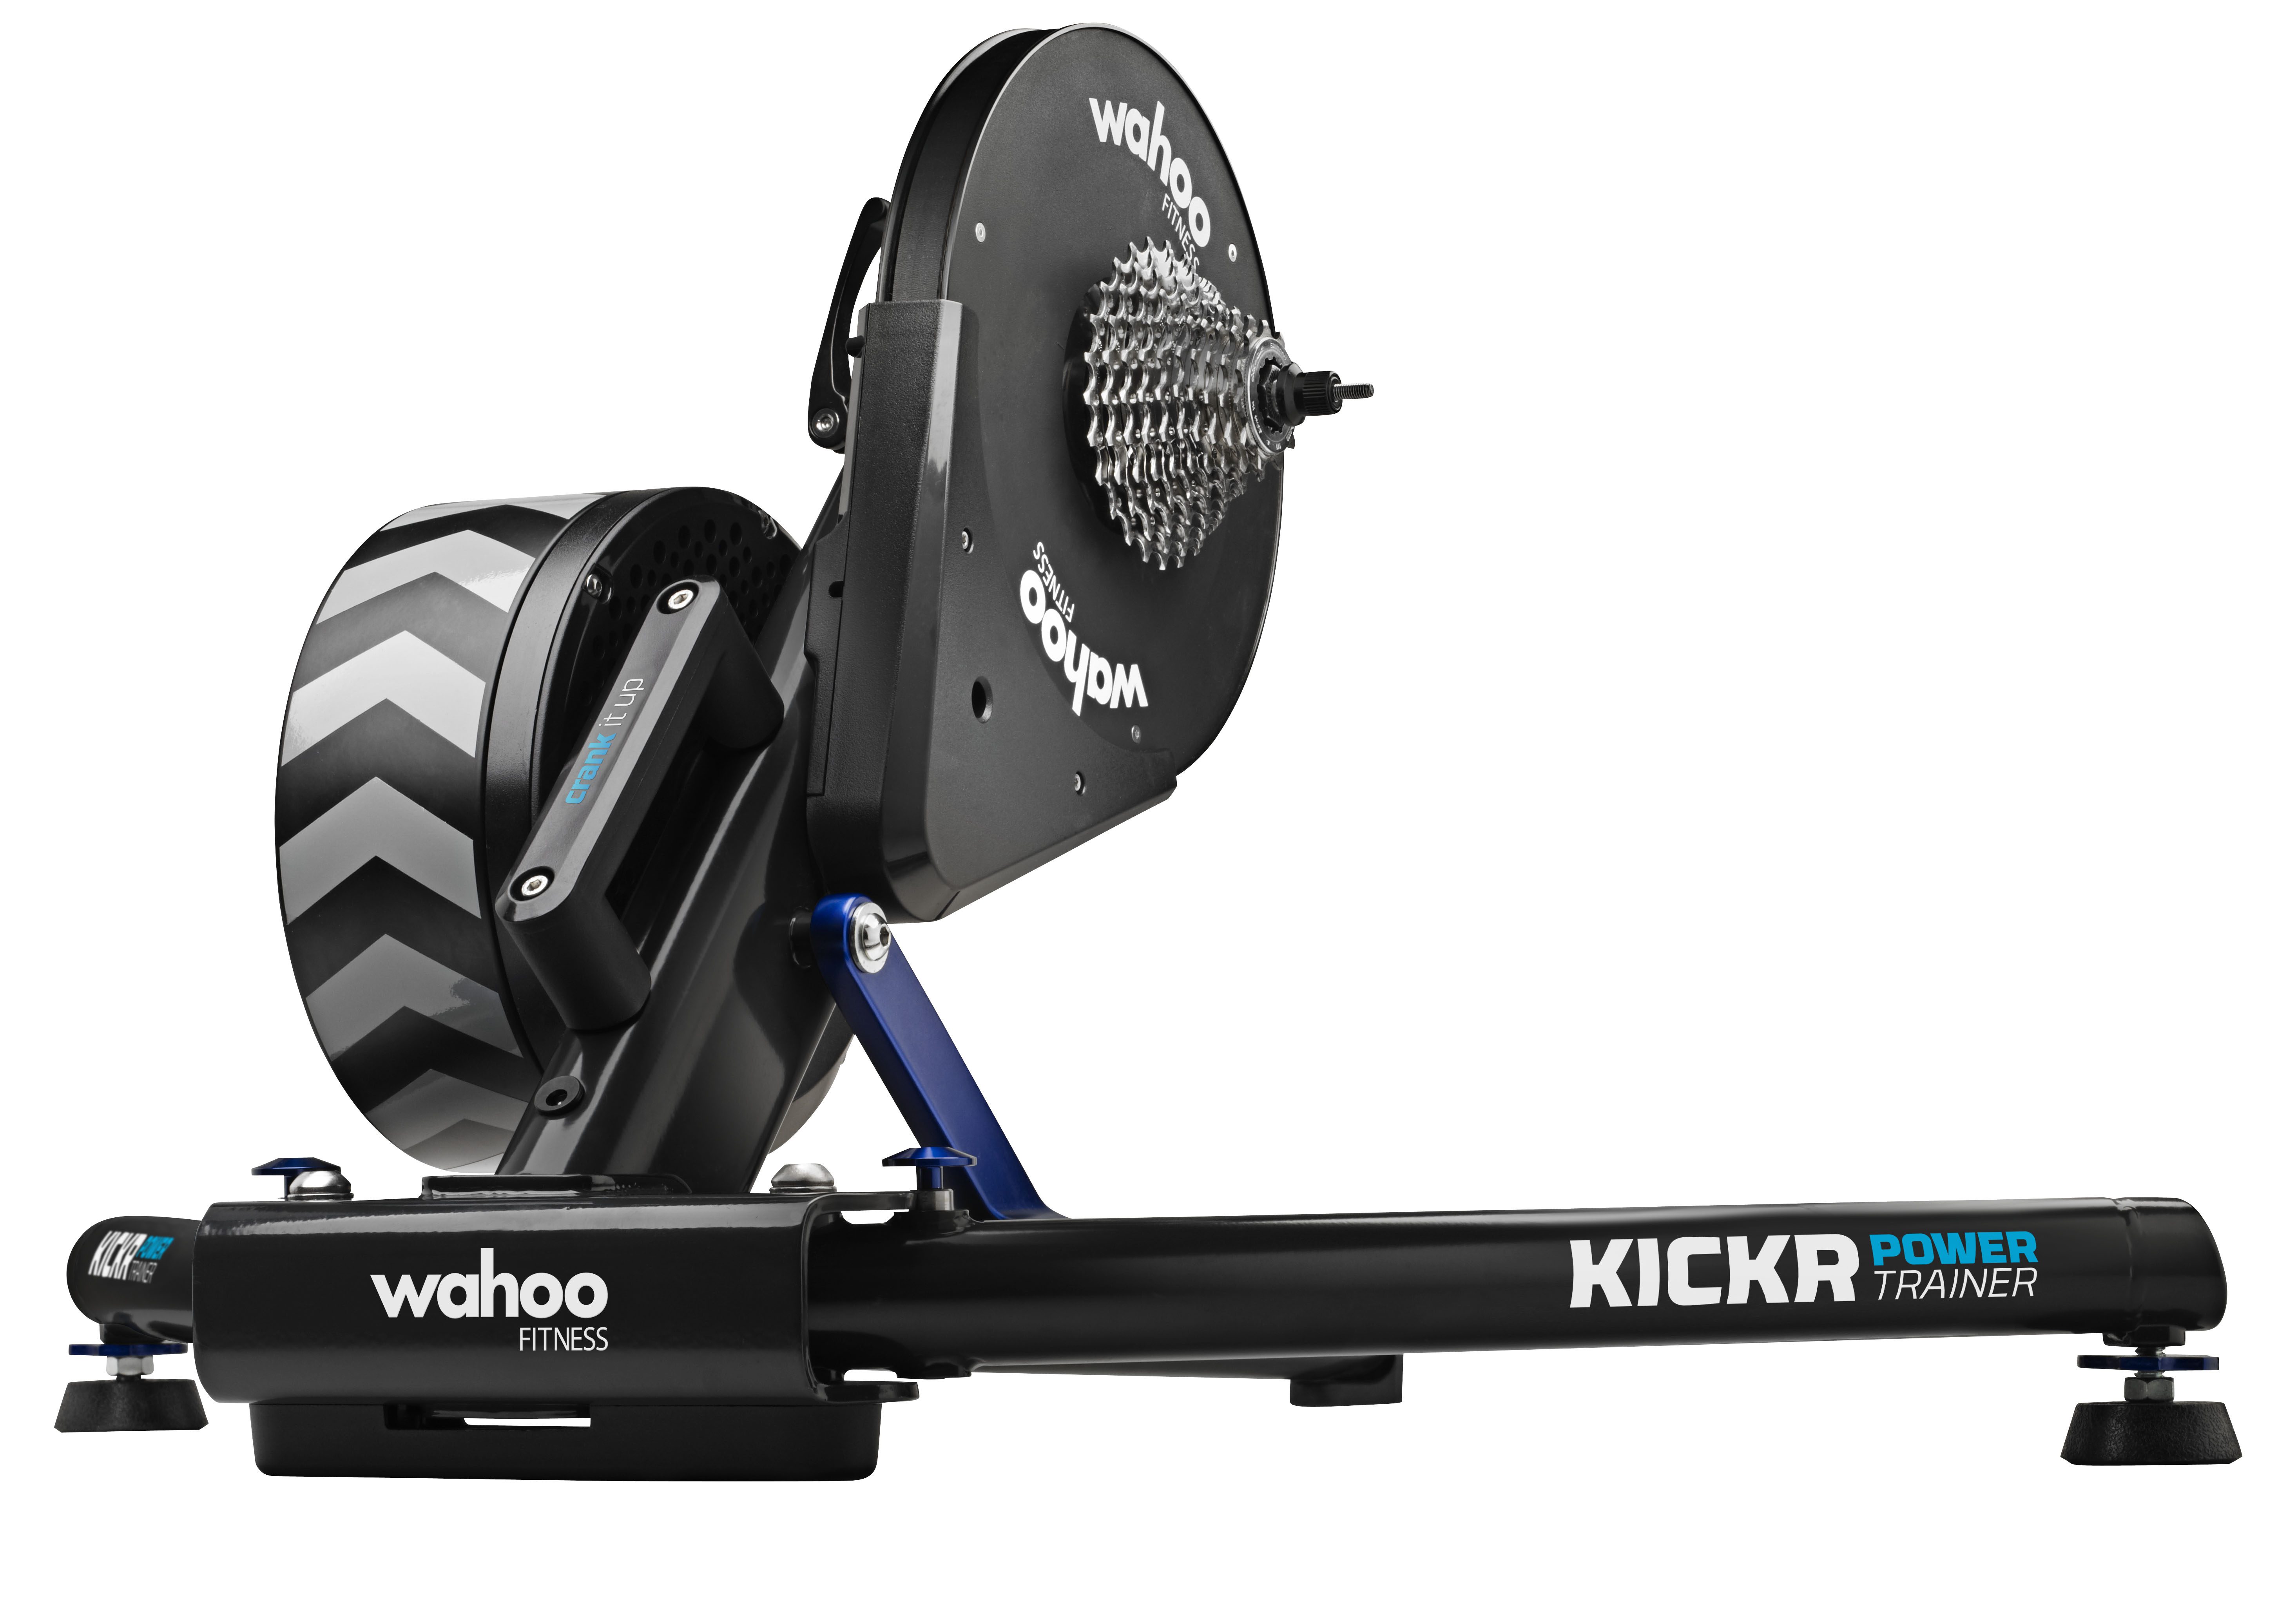 wahoo trainer review